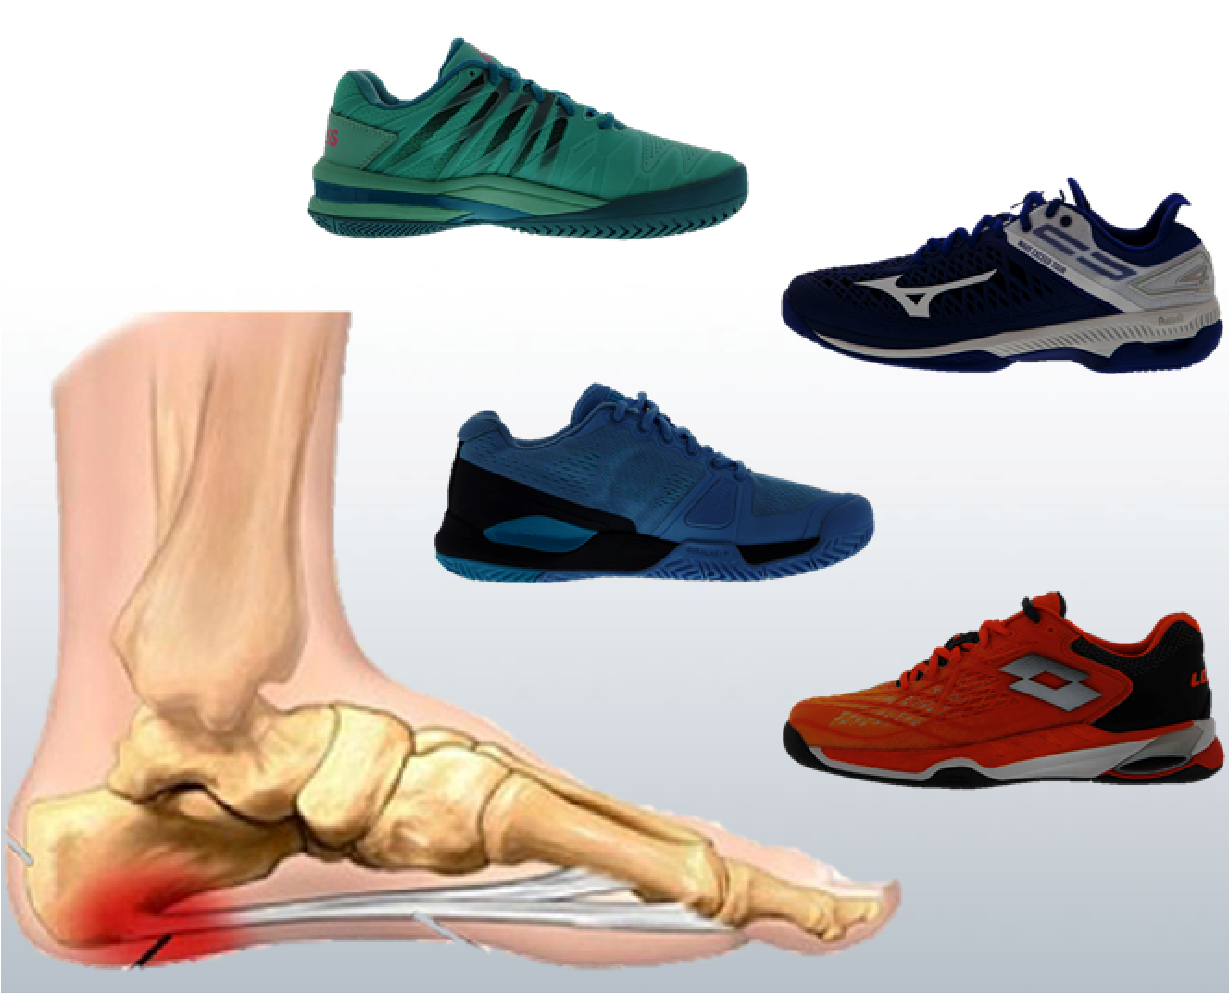 Best Shoes For Plantar Fasciitis